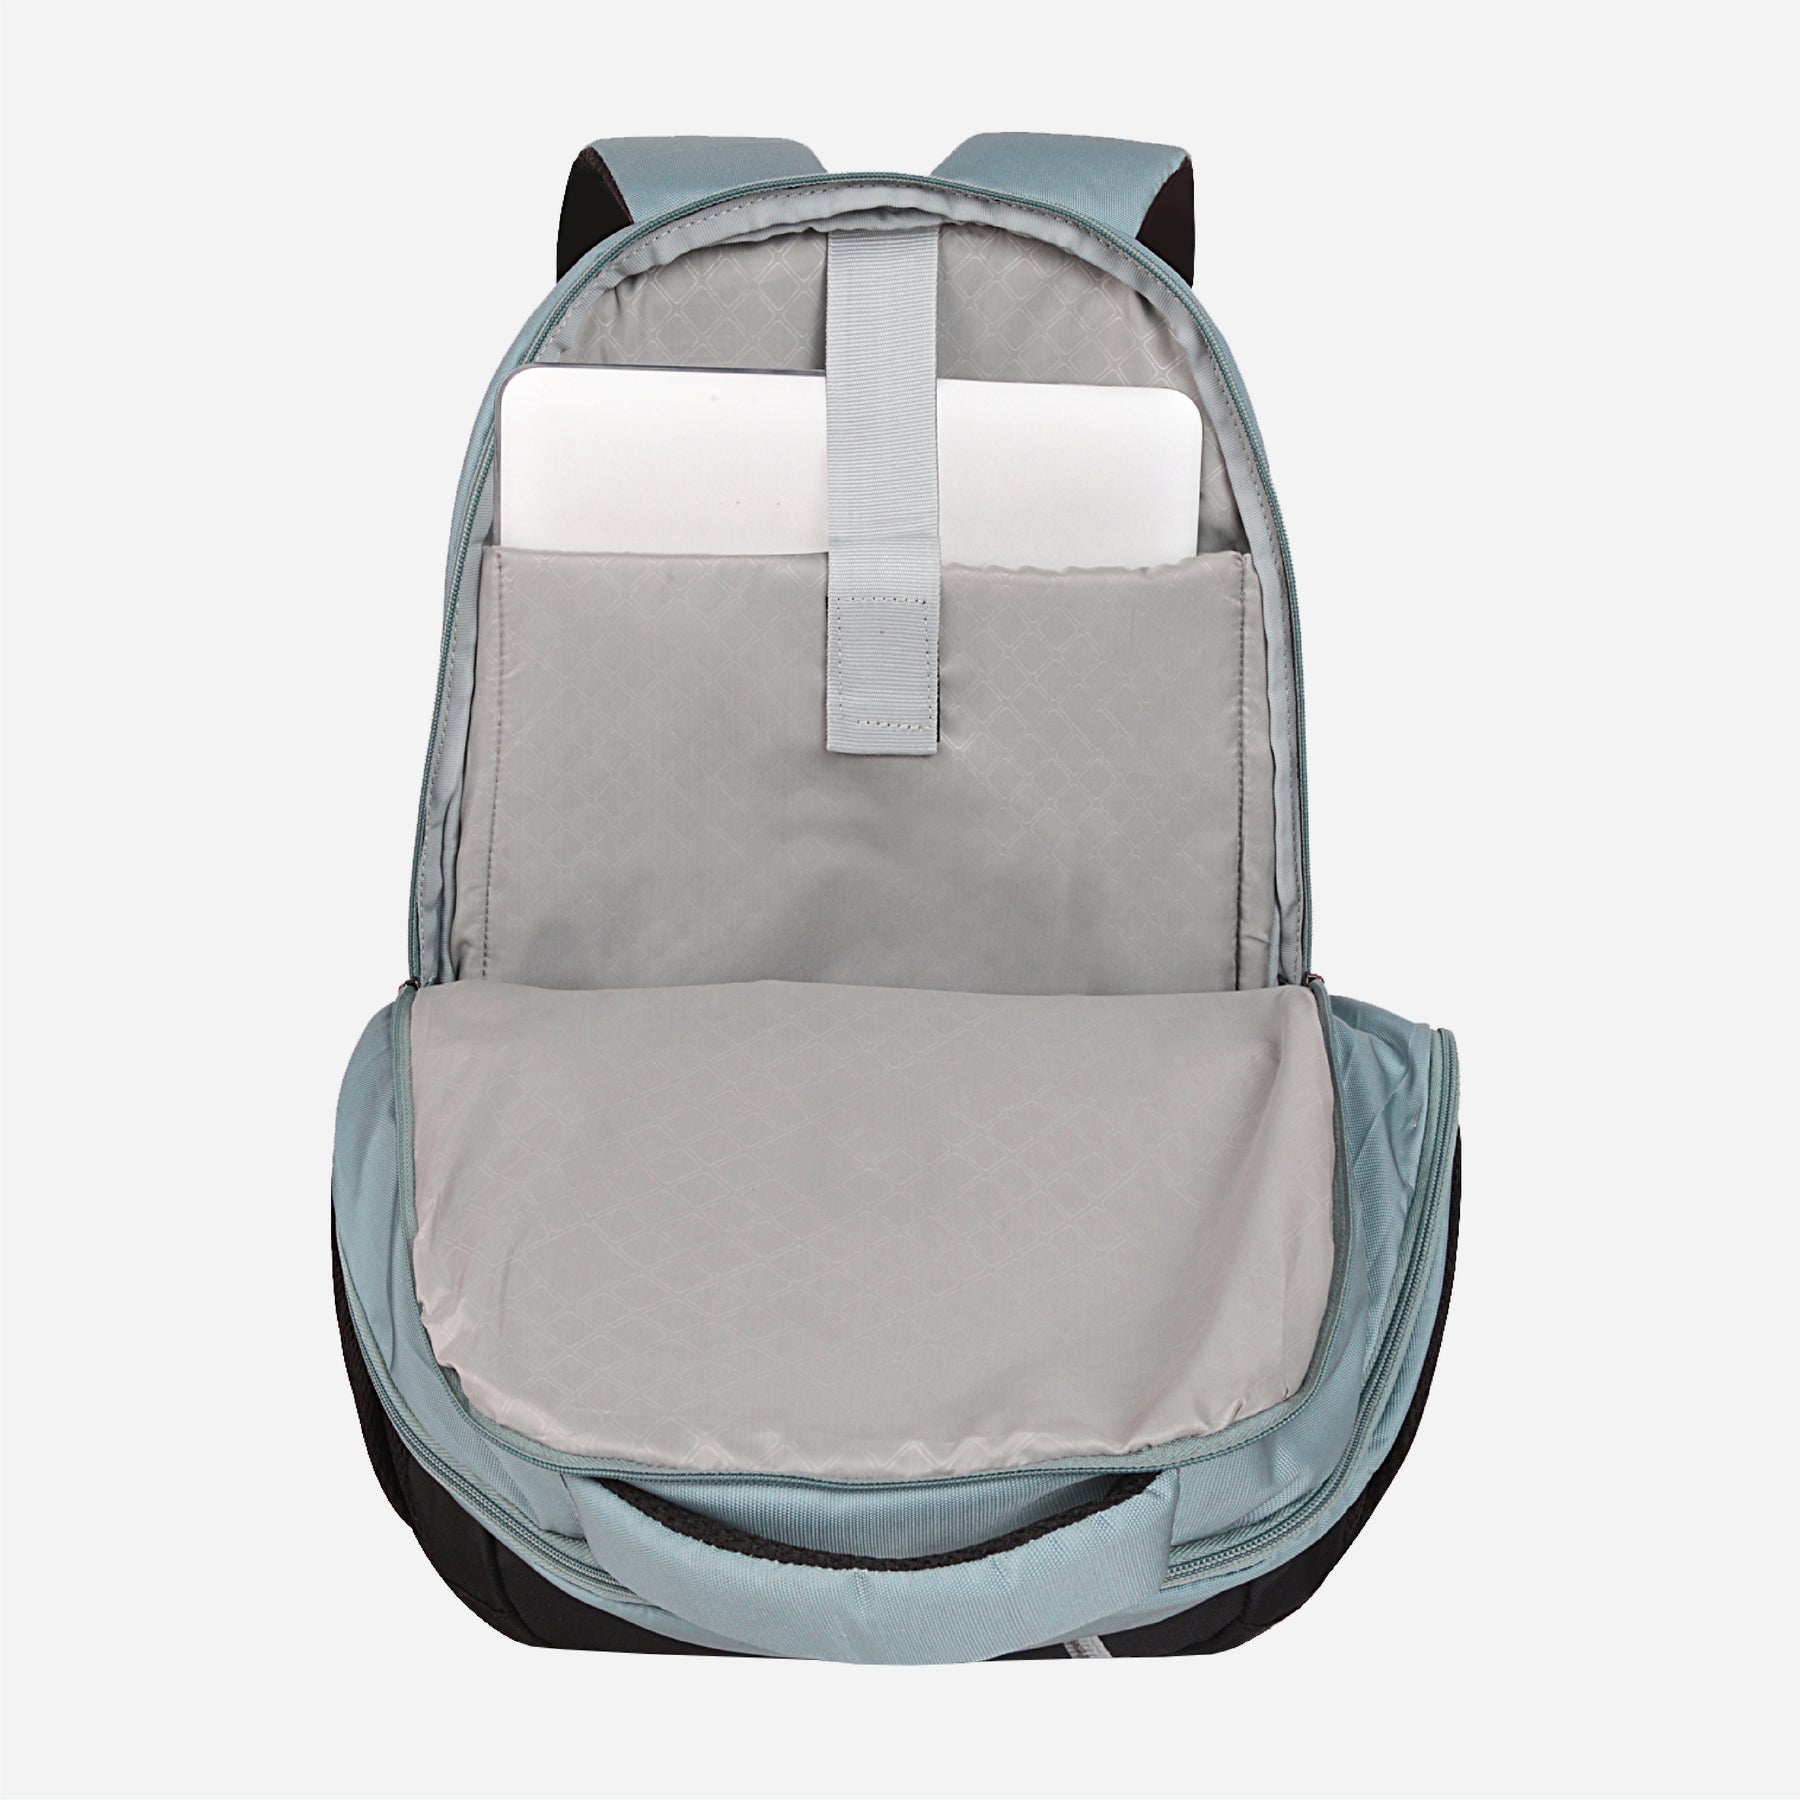 Safari Tint 30L Grey Laptop Backpack with Easy Access Pockets